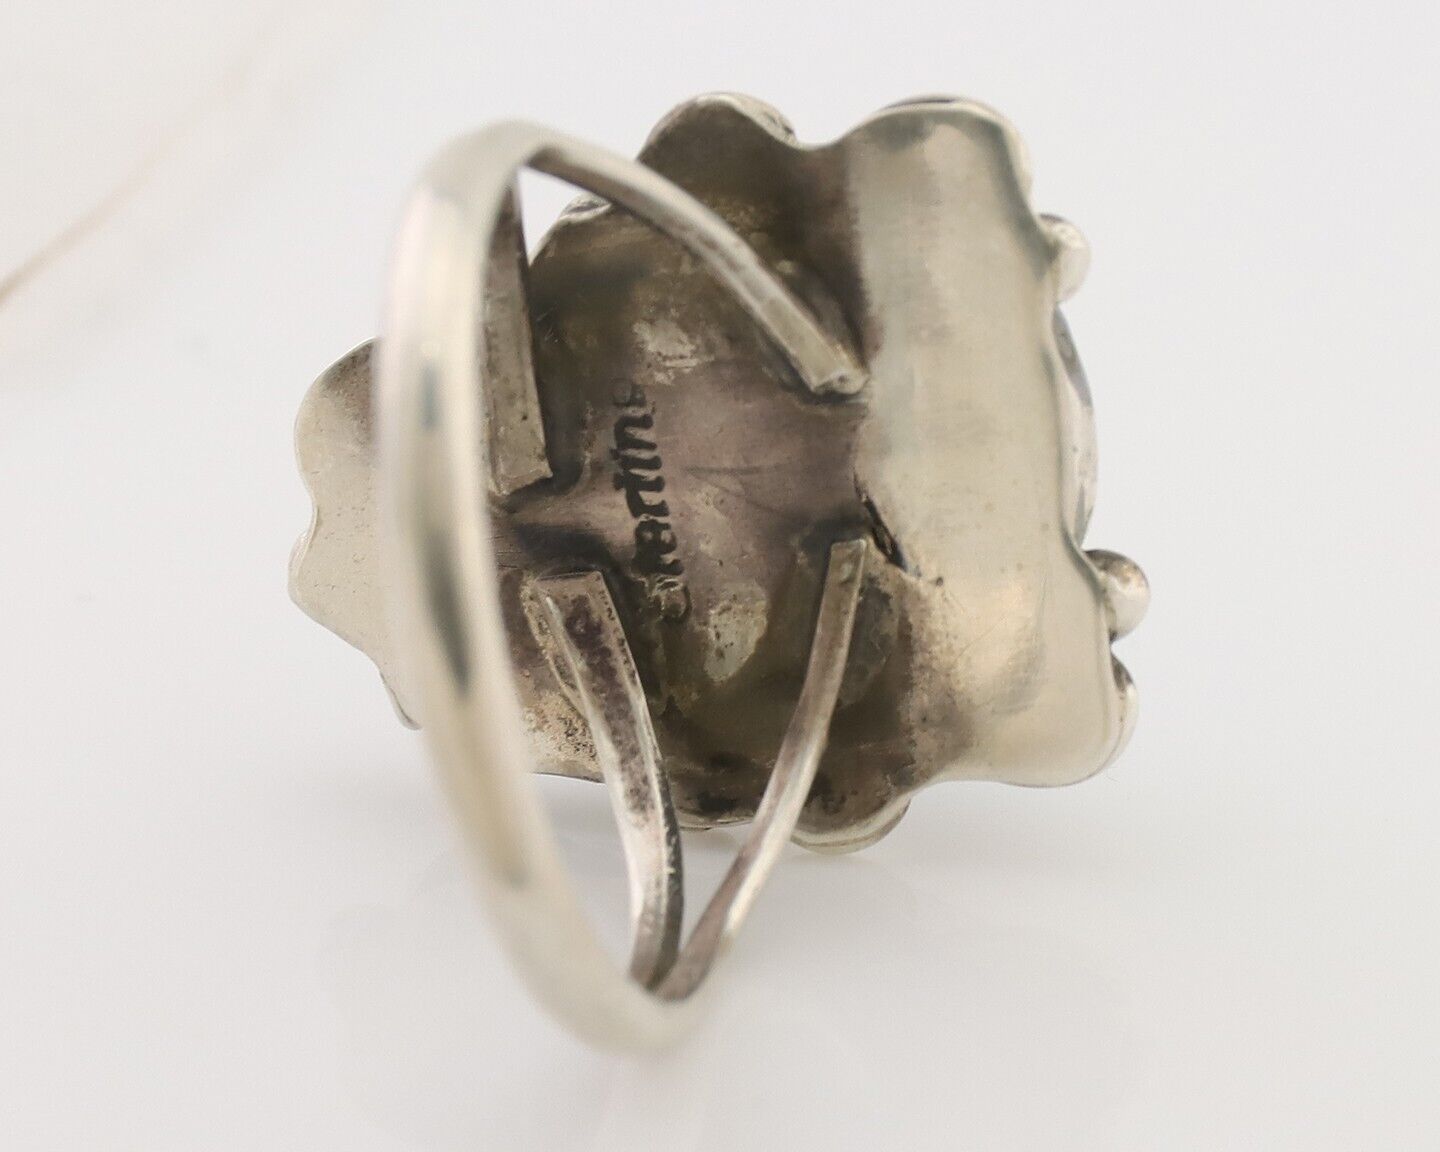 Navajo Ring 925 Silver Morenci Tuquoise Native American Artist C.80's